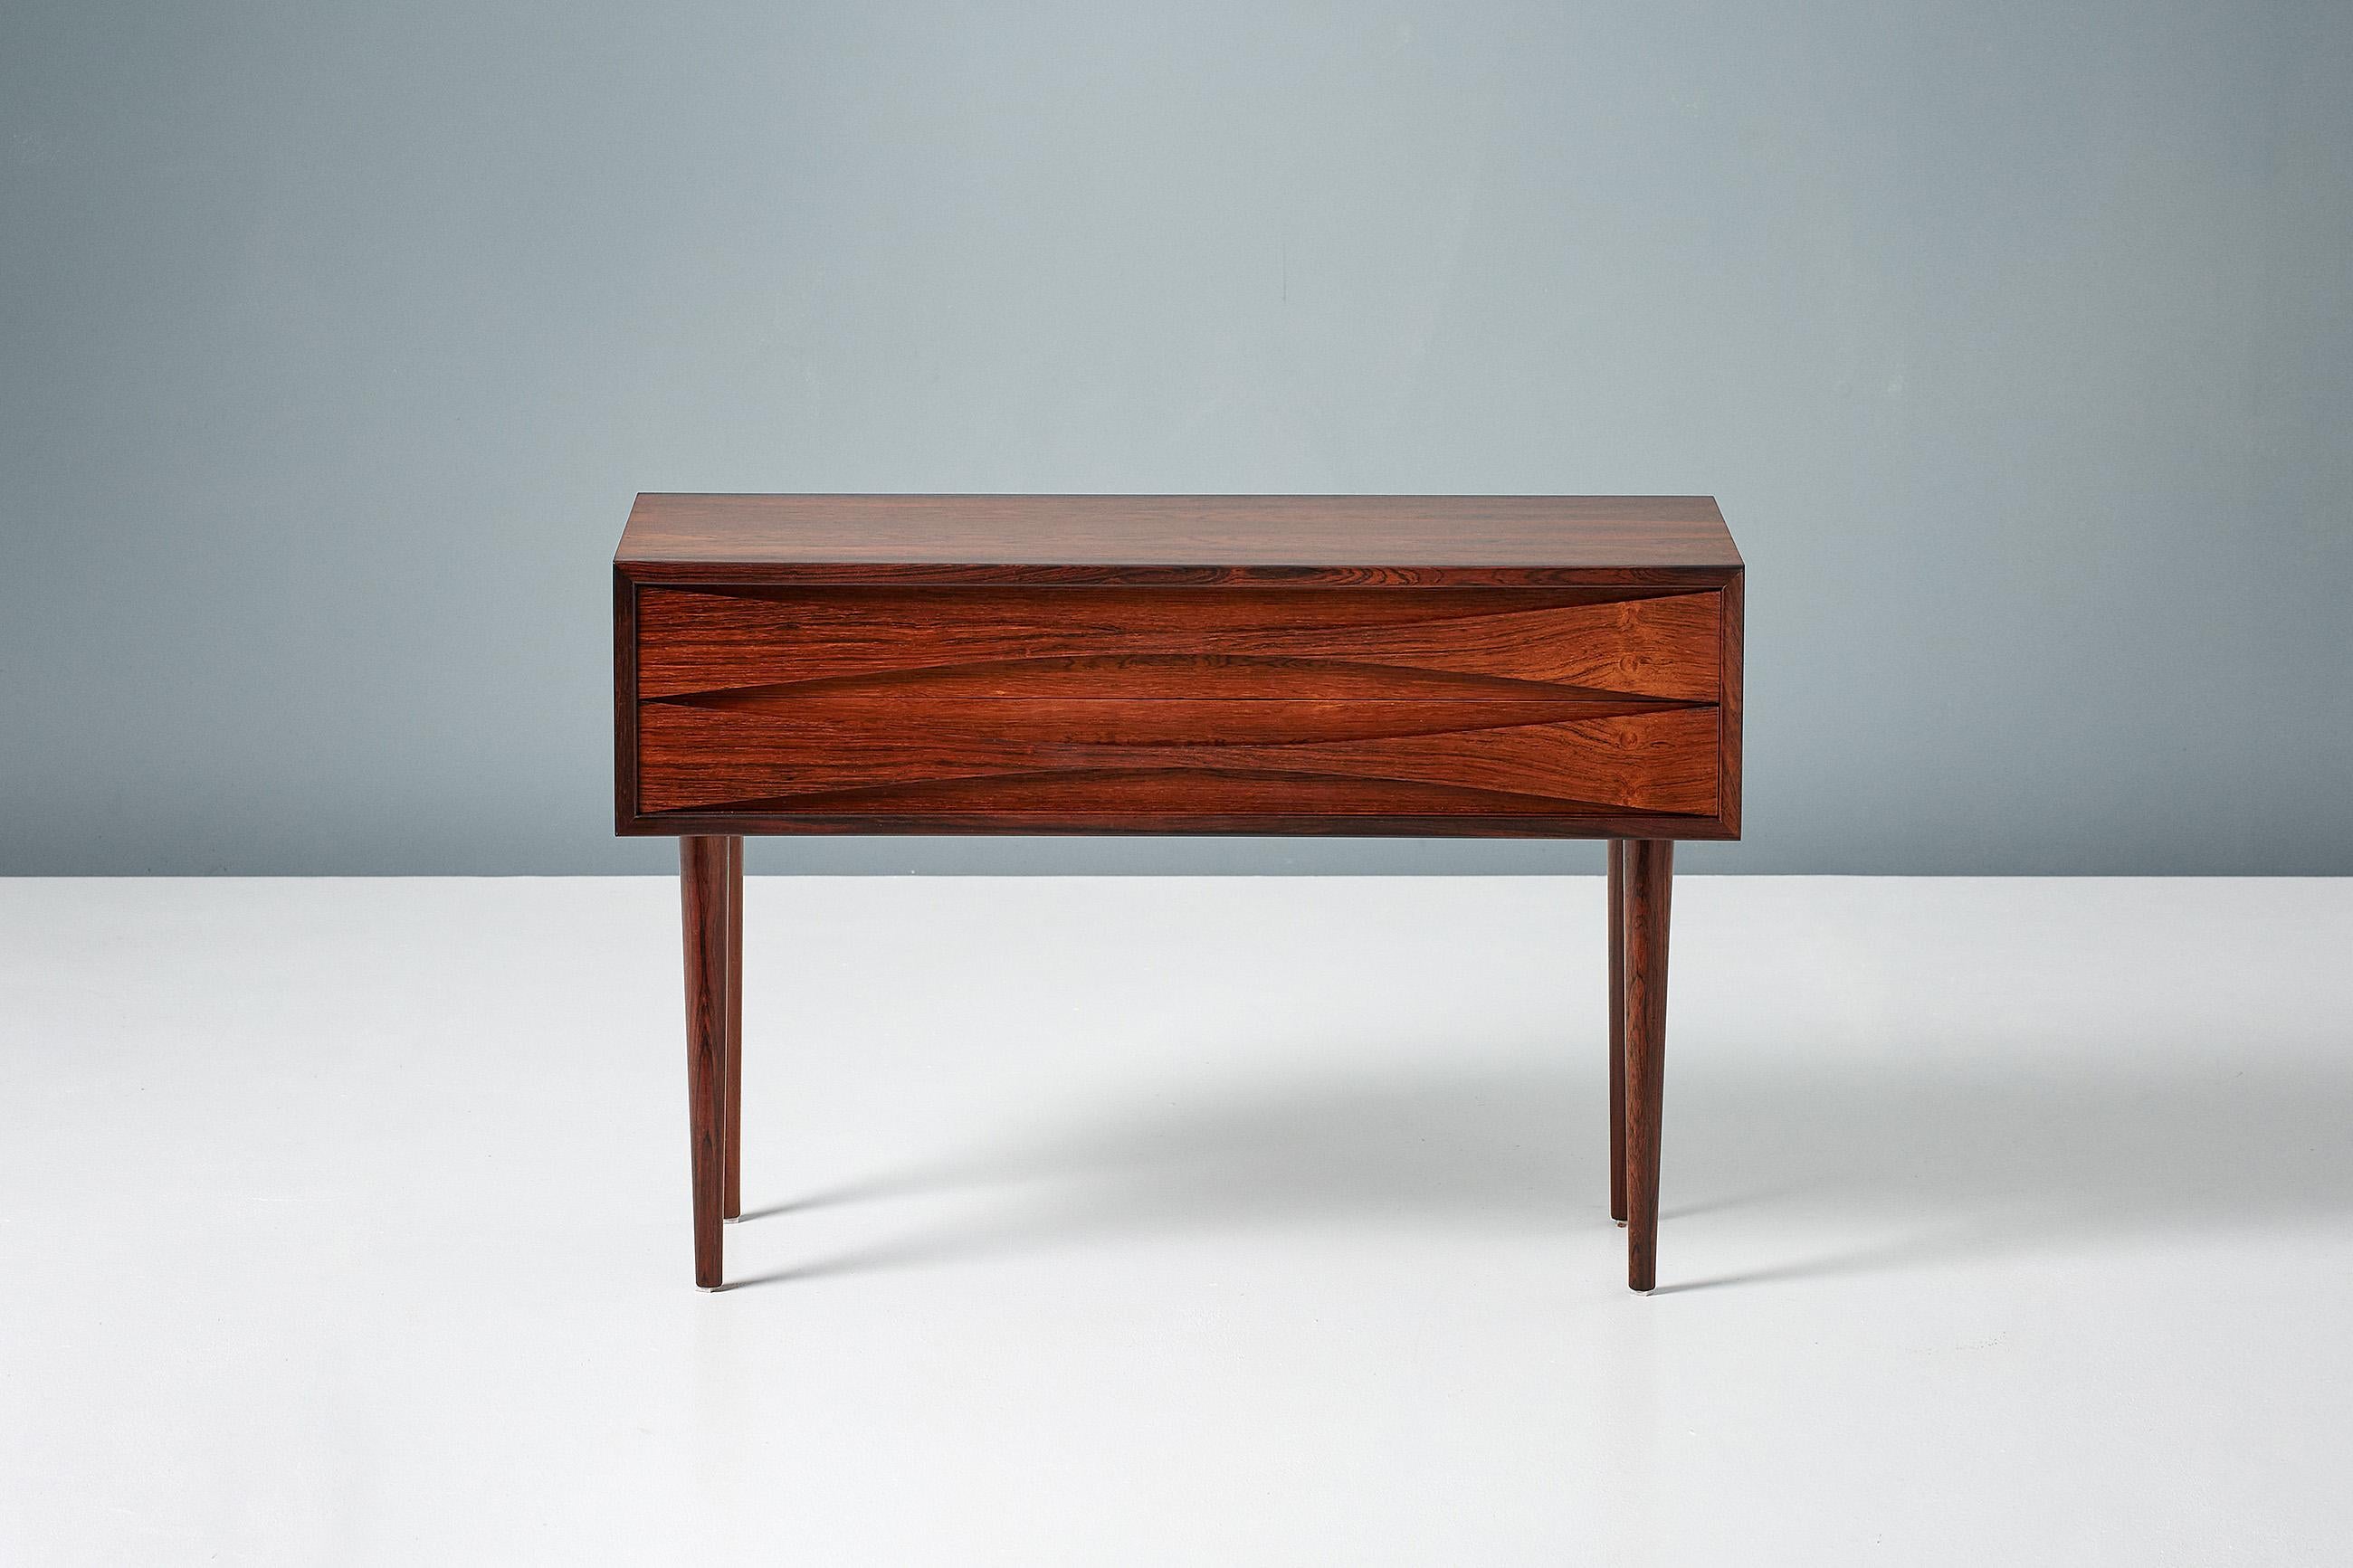 Niels Clausen

Low Chest, c1960

Rosewood chest by Niels Clausen for NC Mobler, Odense, Denmark. Produced c1960. Two drawers with trademark scalloped pulls and solid tapered legs.

Measures: W 80cm 
D 32cm 
H 54cm.